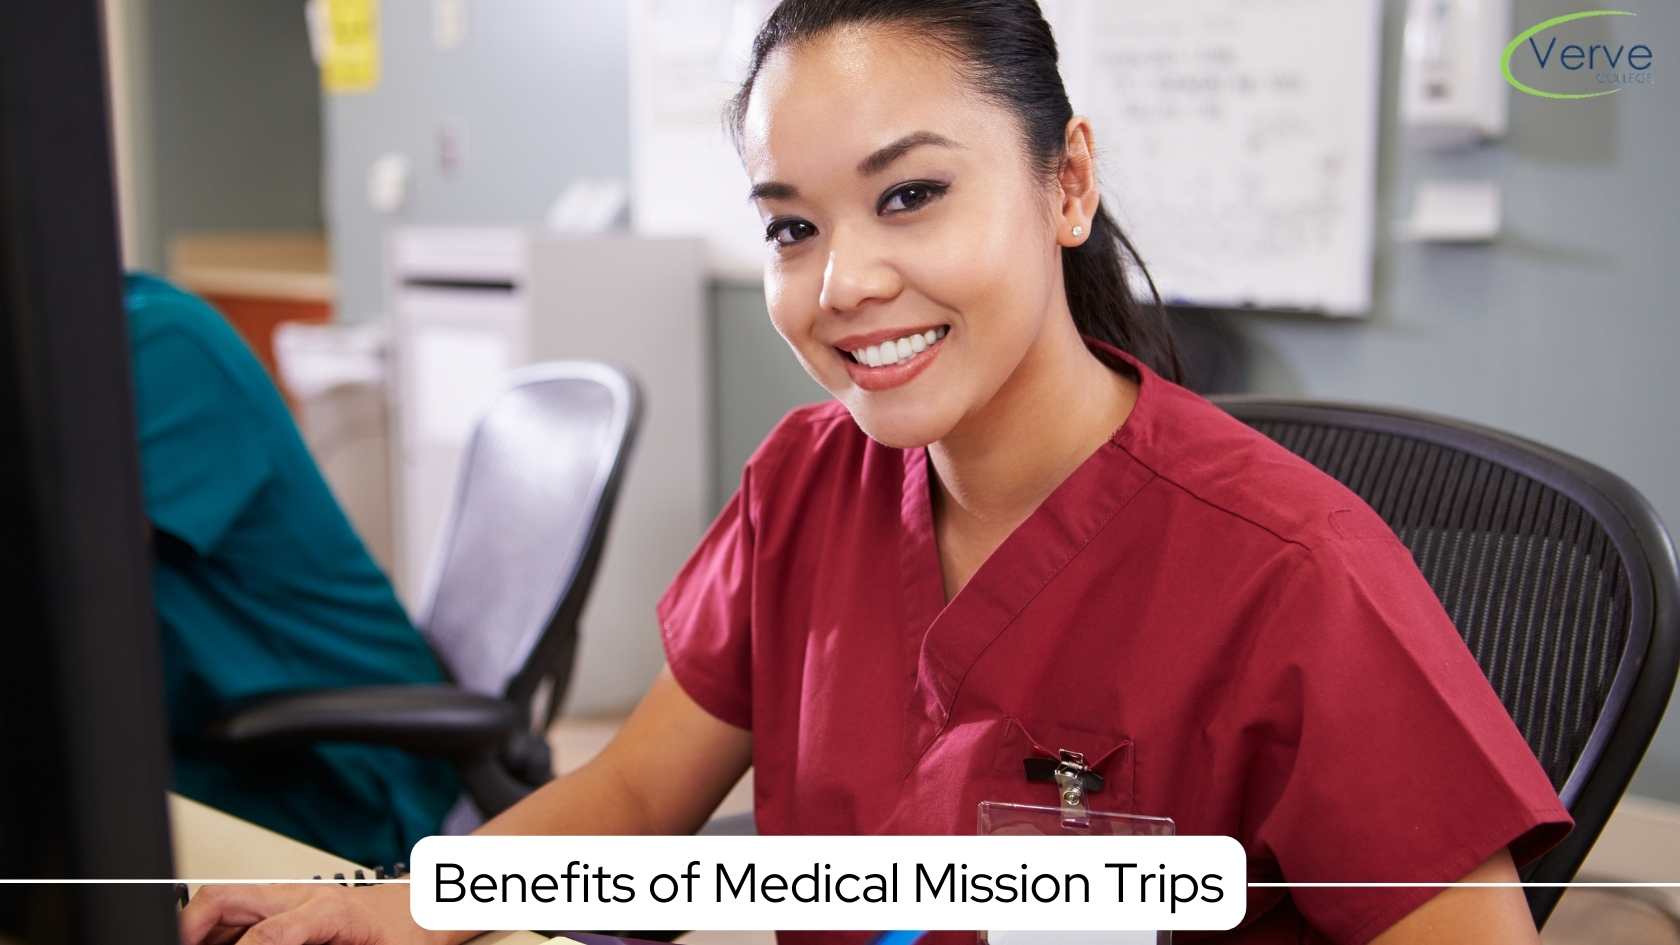 Must Learn About Benefits of Medical Mission Trips